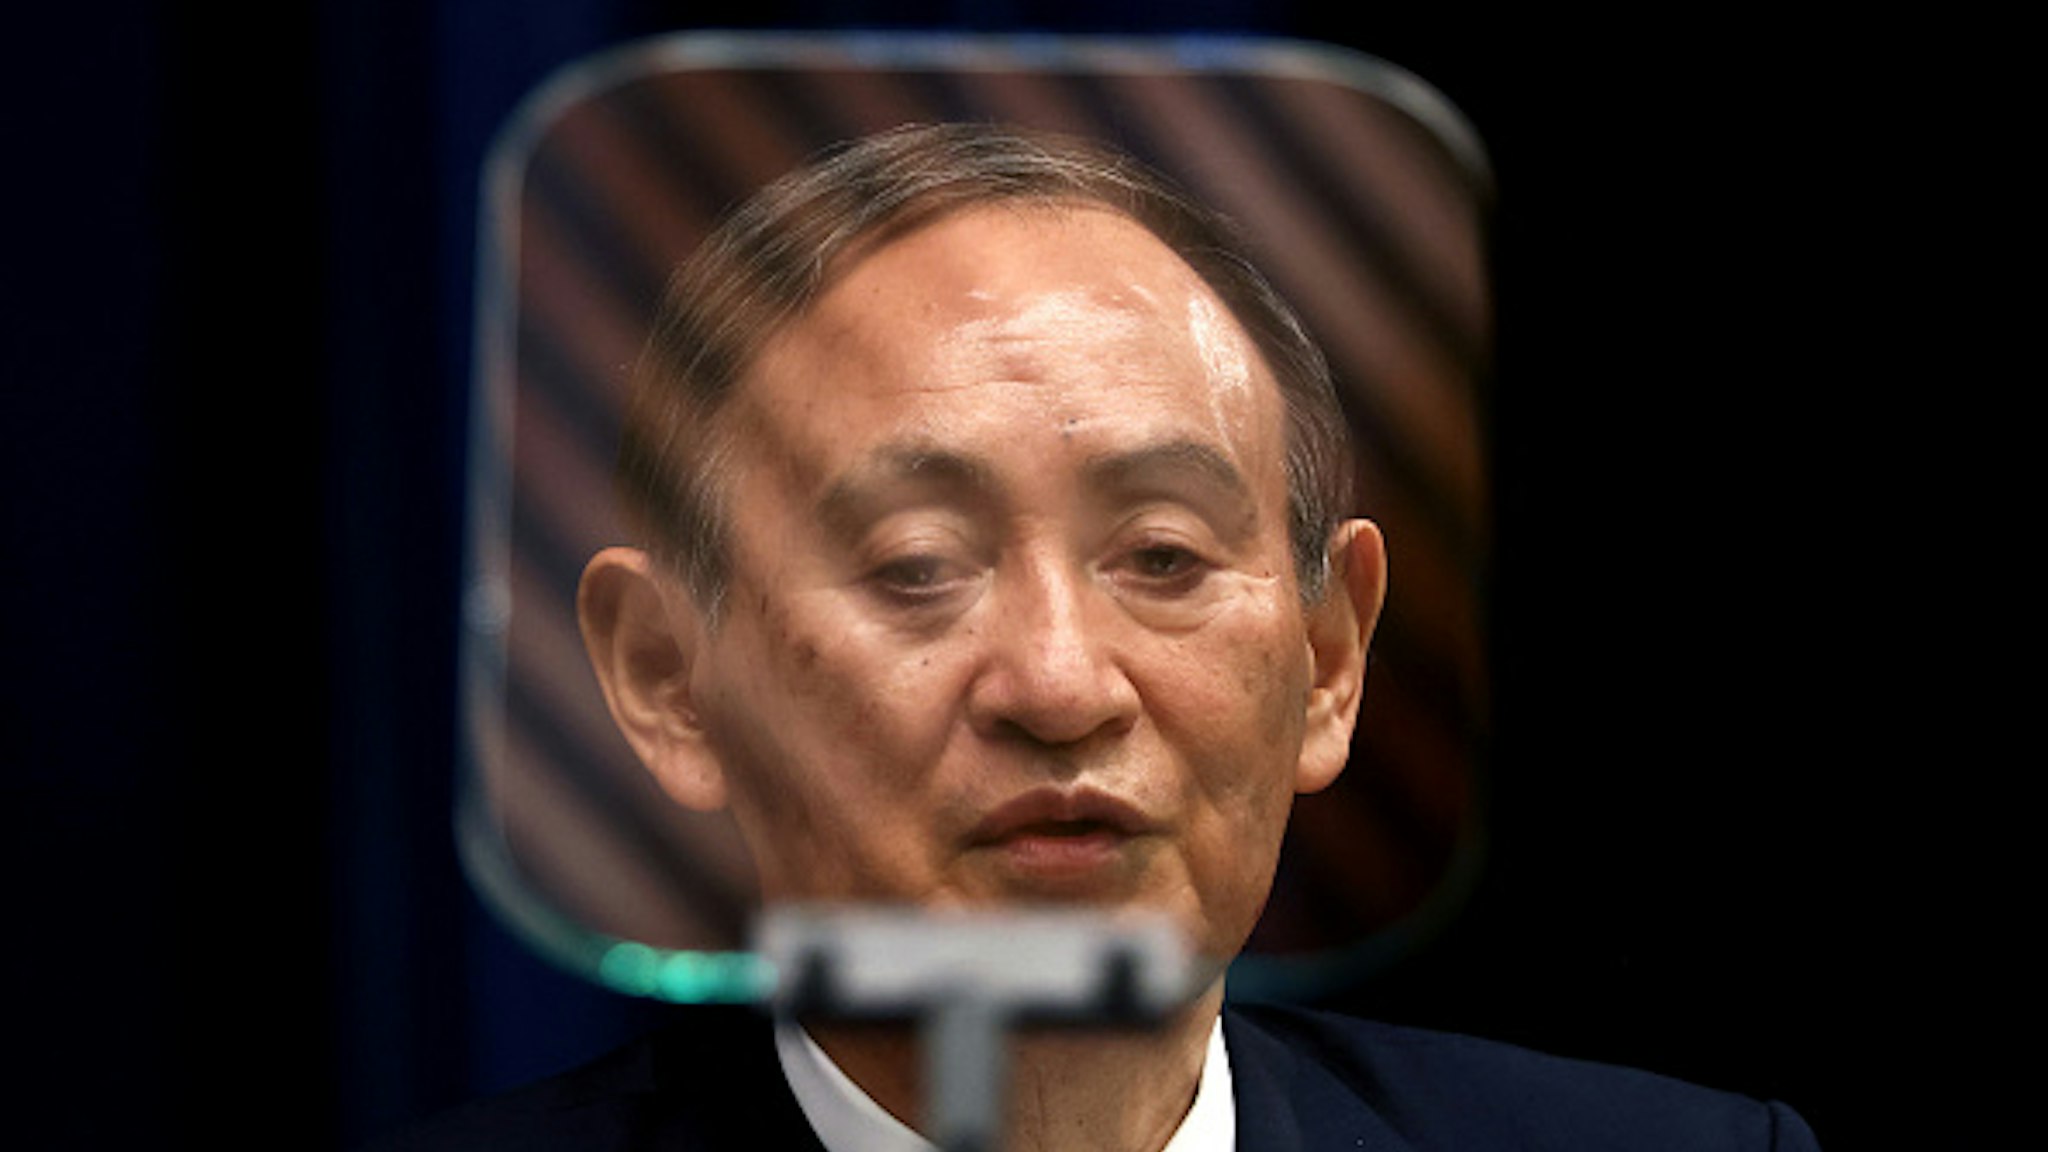 Japan's Prime Minister Yoshihide Suga speaks during a press conference at the prime minister's official residence in Tokyo on May 28, 2021, as the government expanded a coronavirus state of emergency.